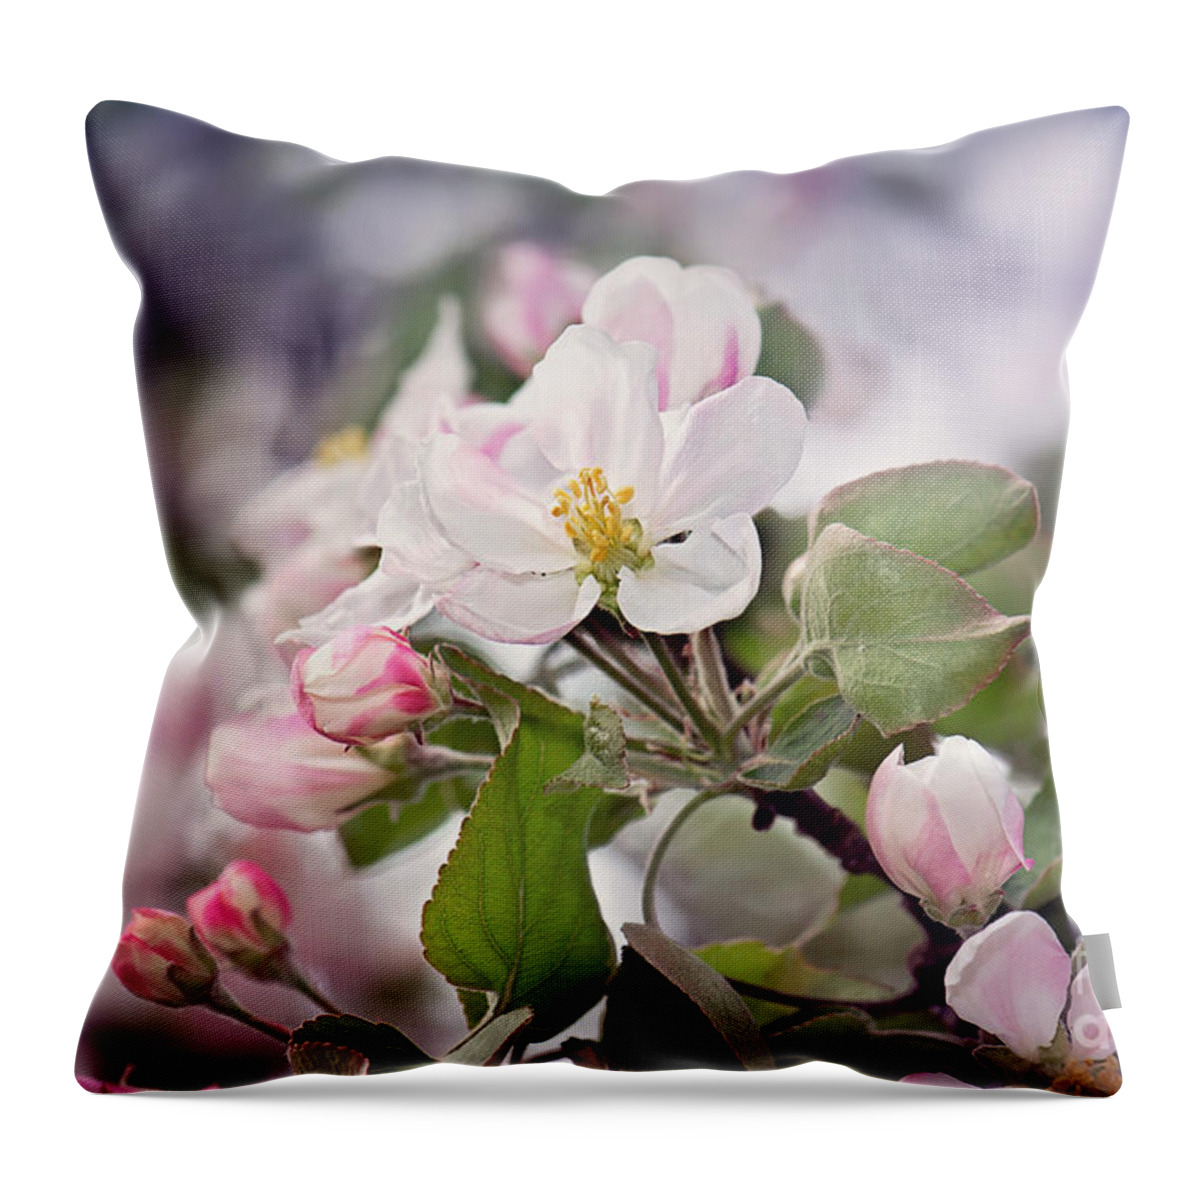 Spring Apple Blossom Print Throw Pillow featuring the photograph Spring Apple Blossoms by Gwen Gibson